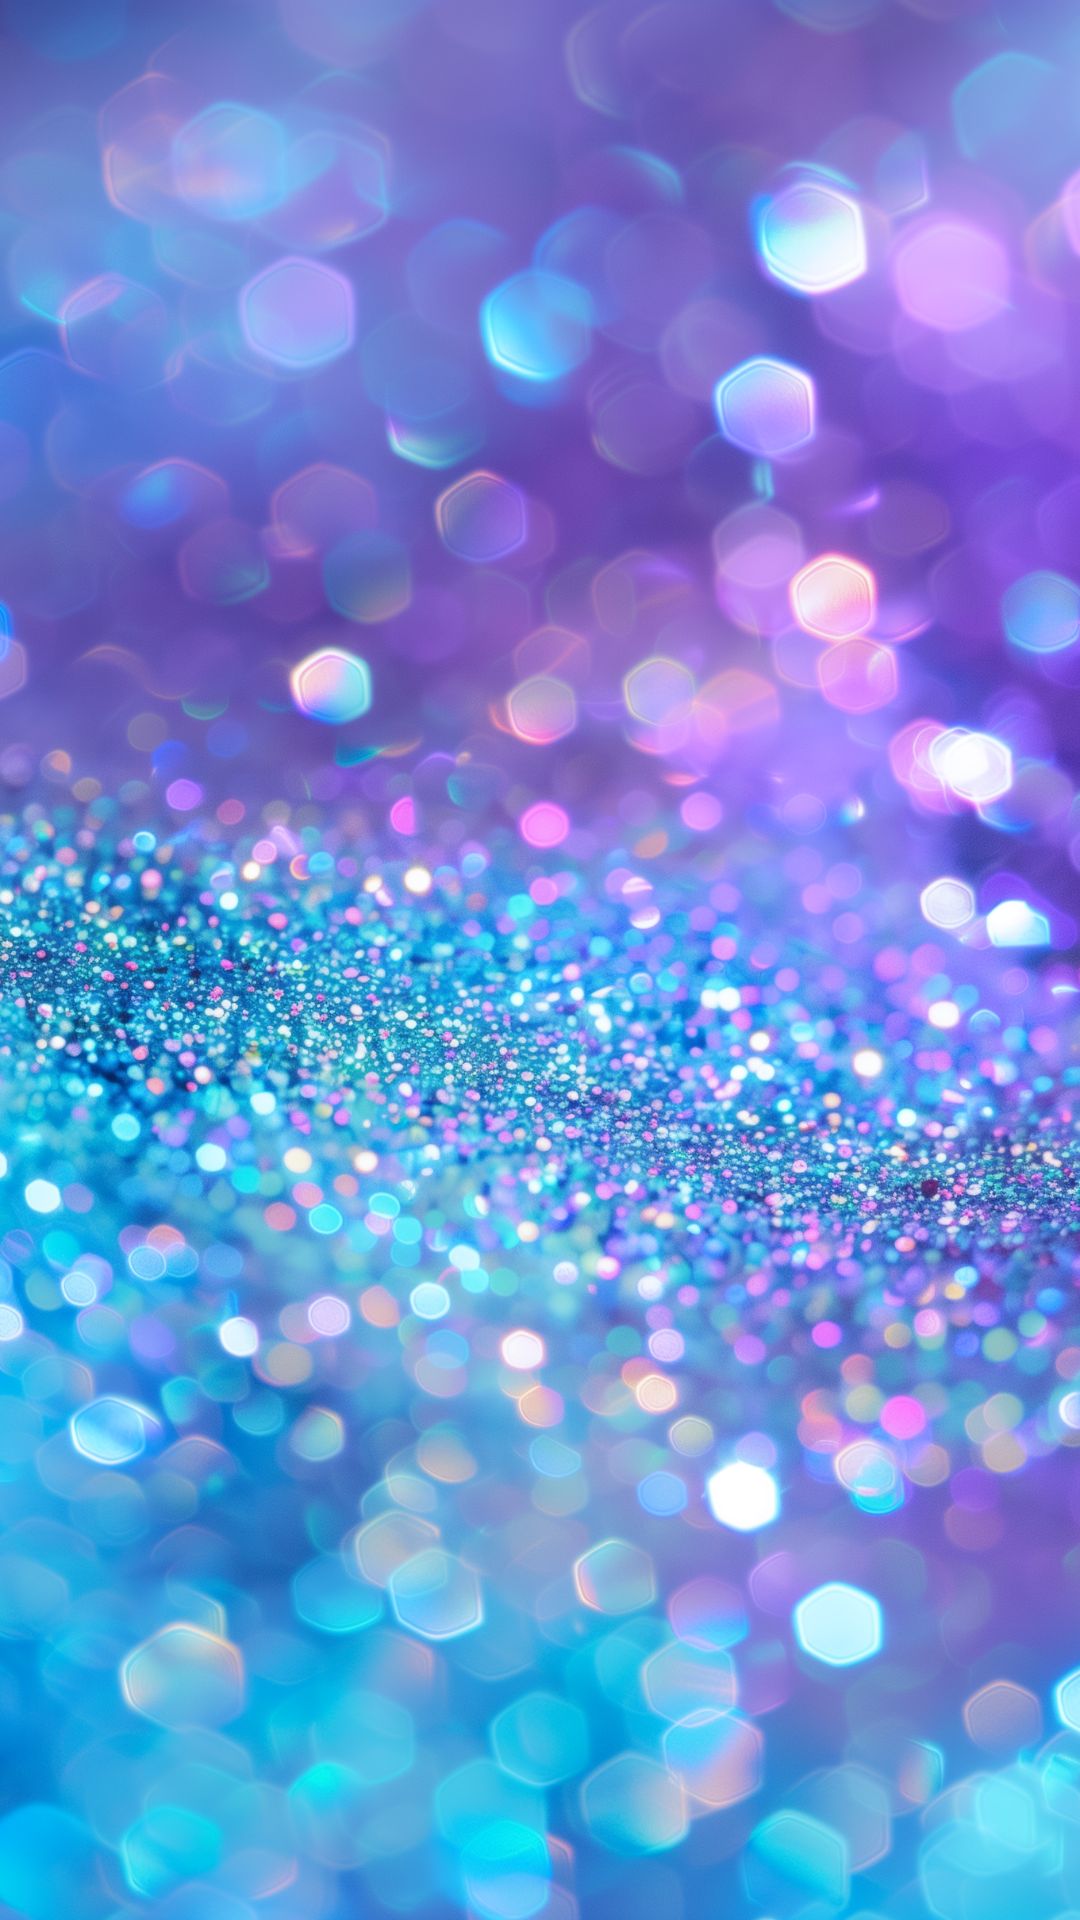 Make Your Phone Sparkle With 21 Glitter iPhone Wallpapers and Midjourney Prompts - Sprinkle of AI